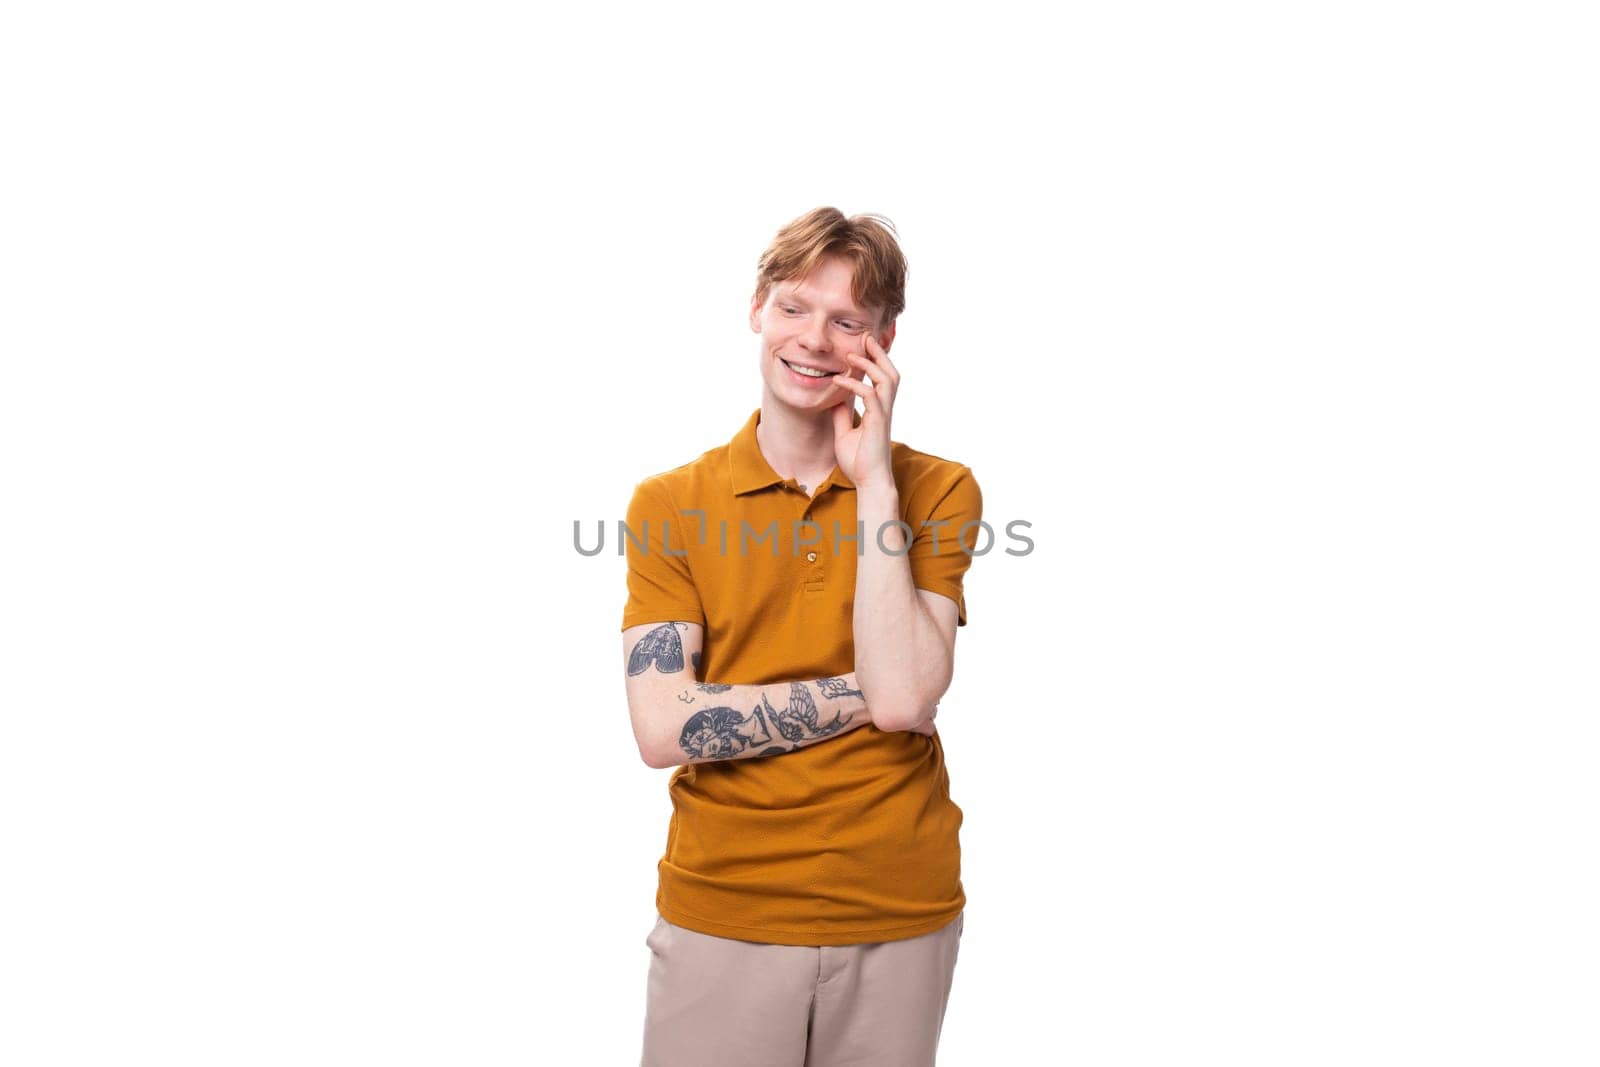 young fashionable student man with short red hair dressed in a yellow t-shirt is actively gesturing.